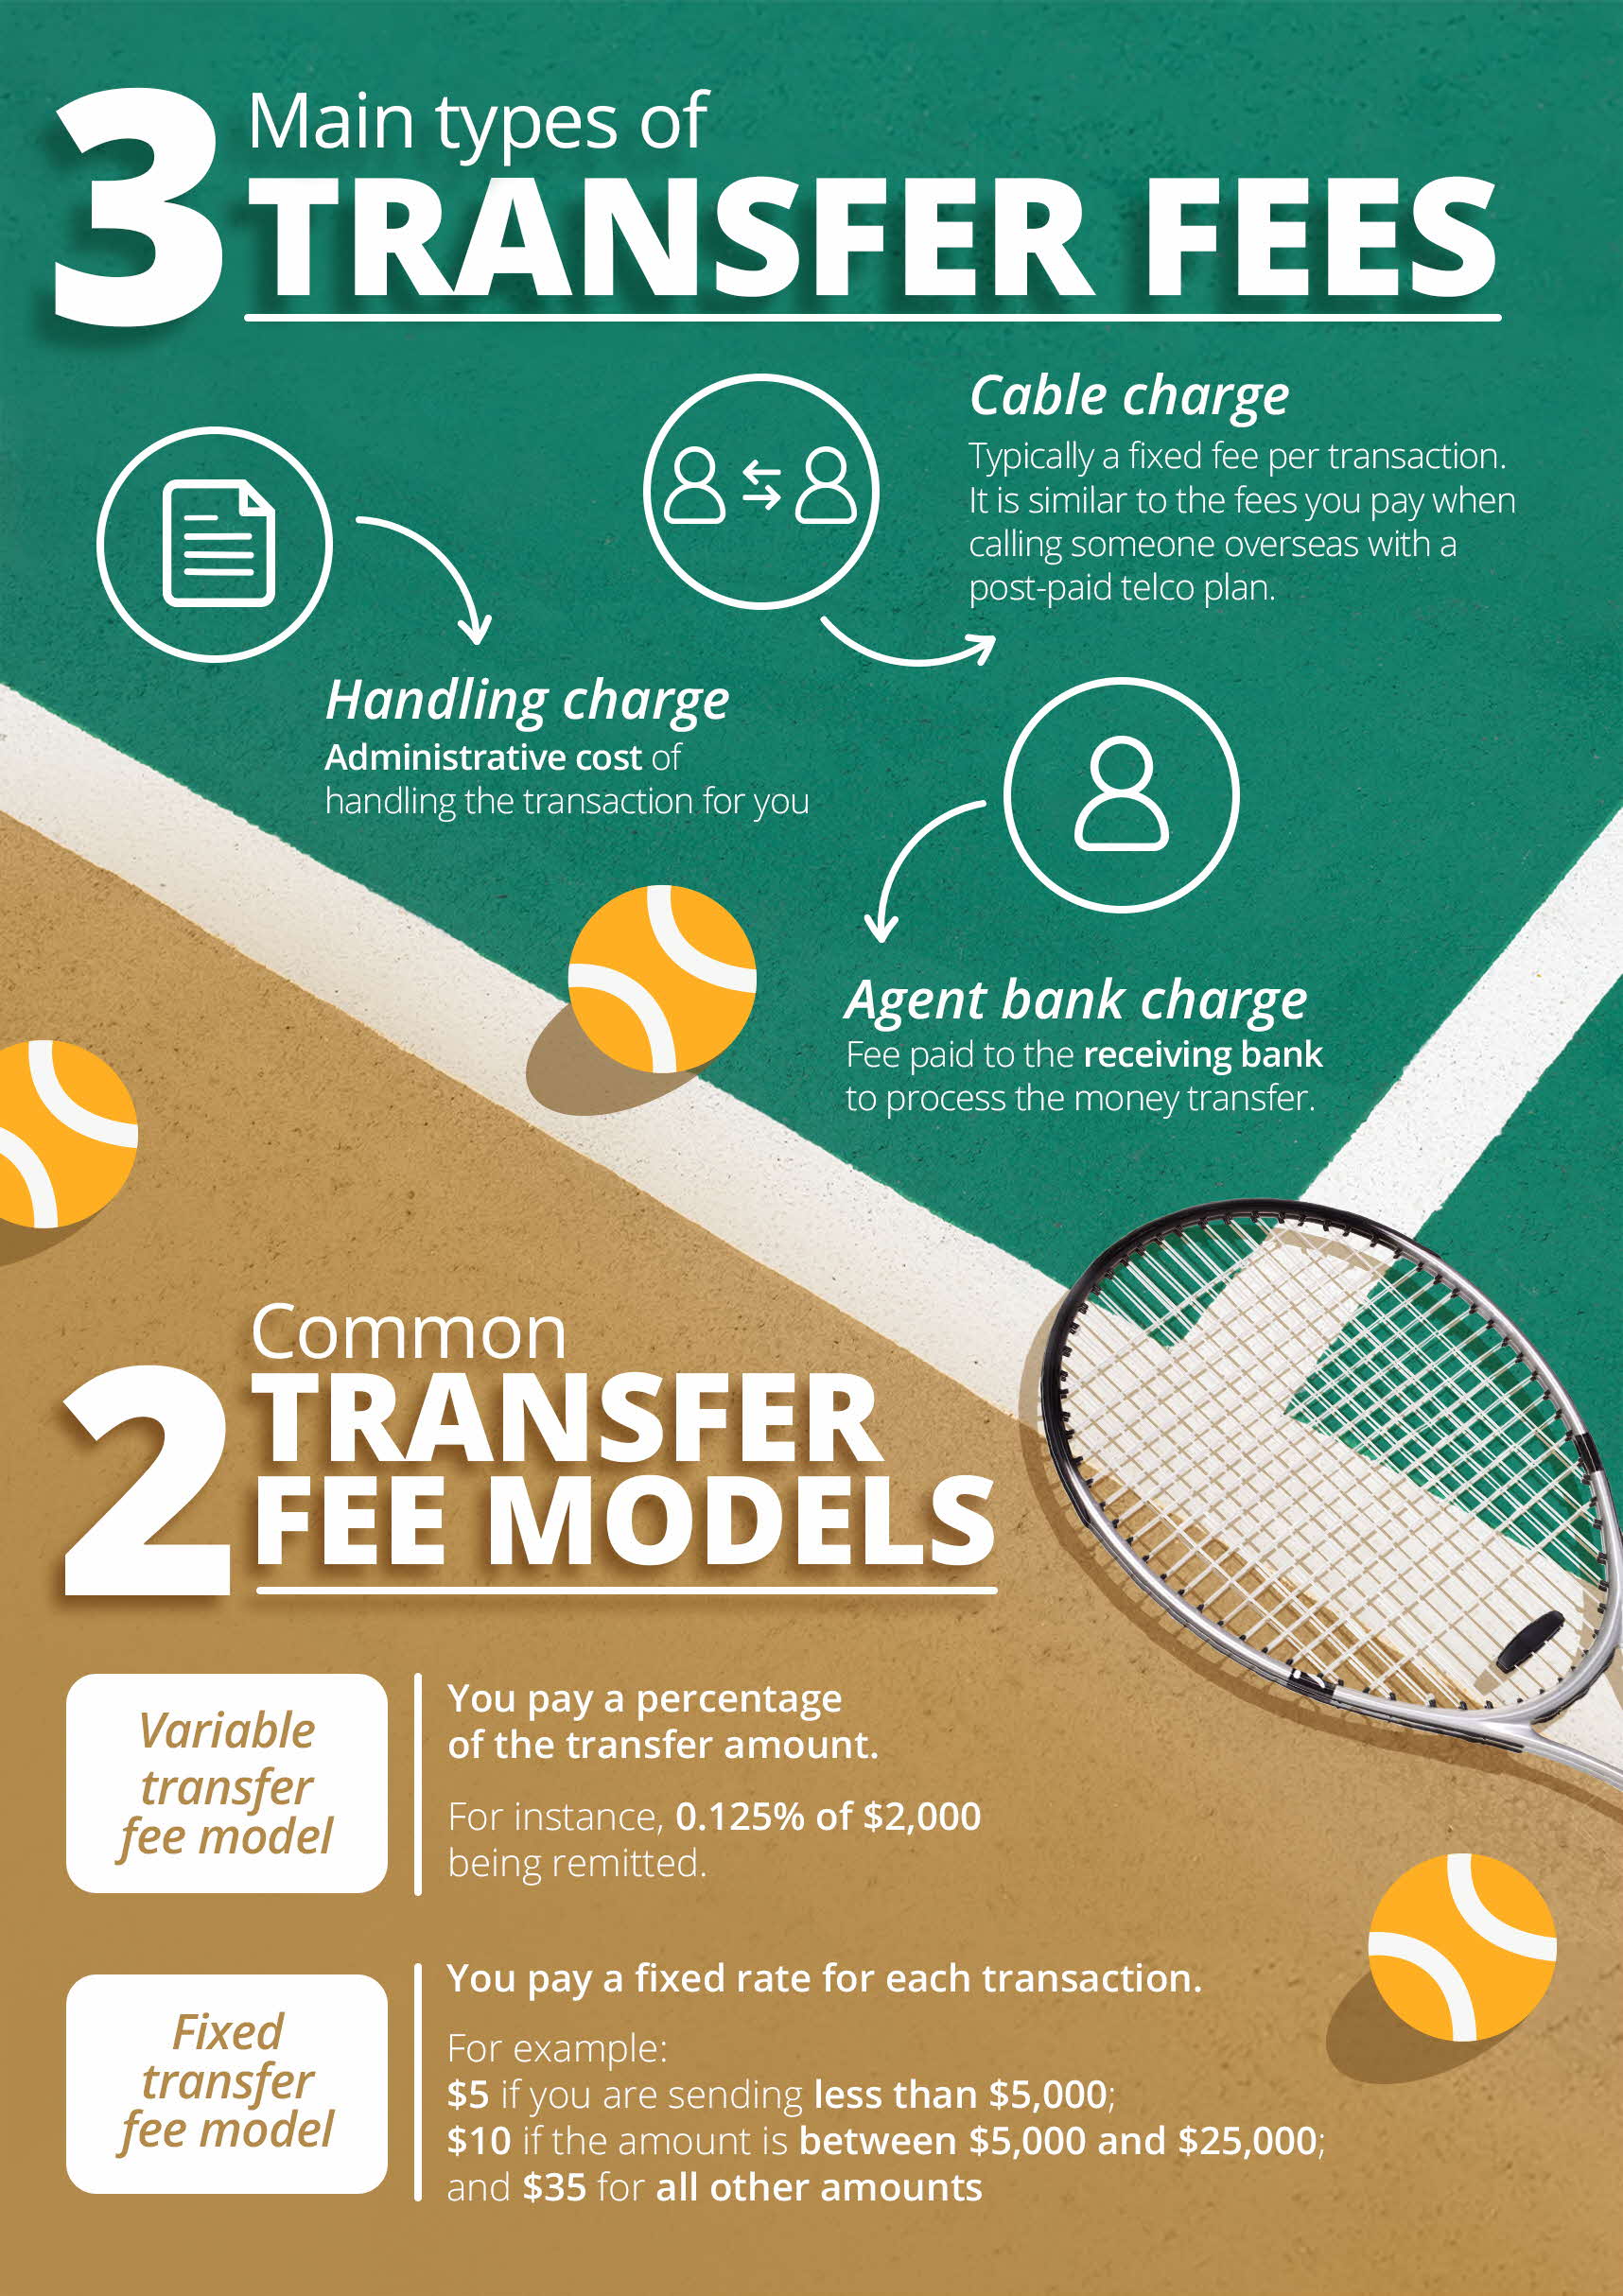 Common types of international money transfer fees, and common transfer fee models